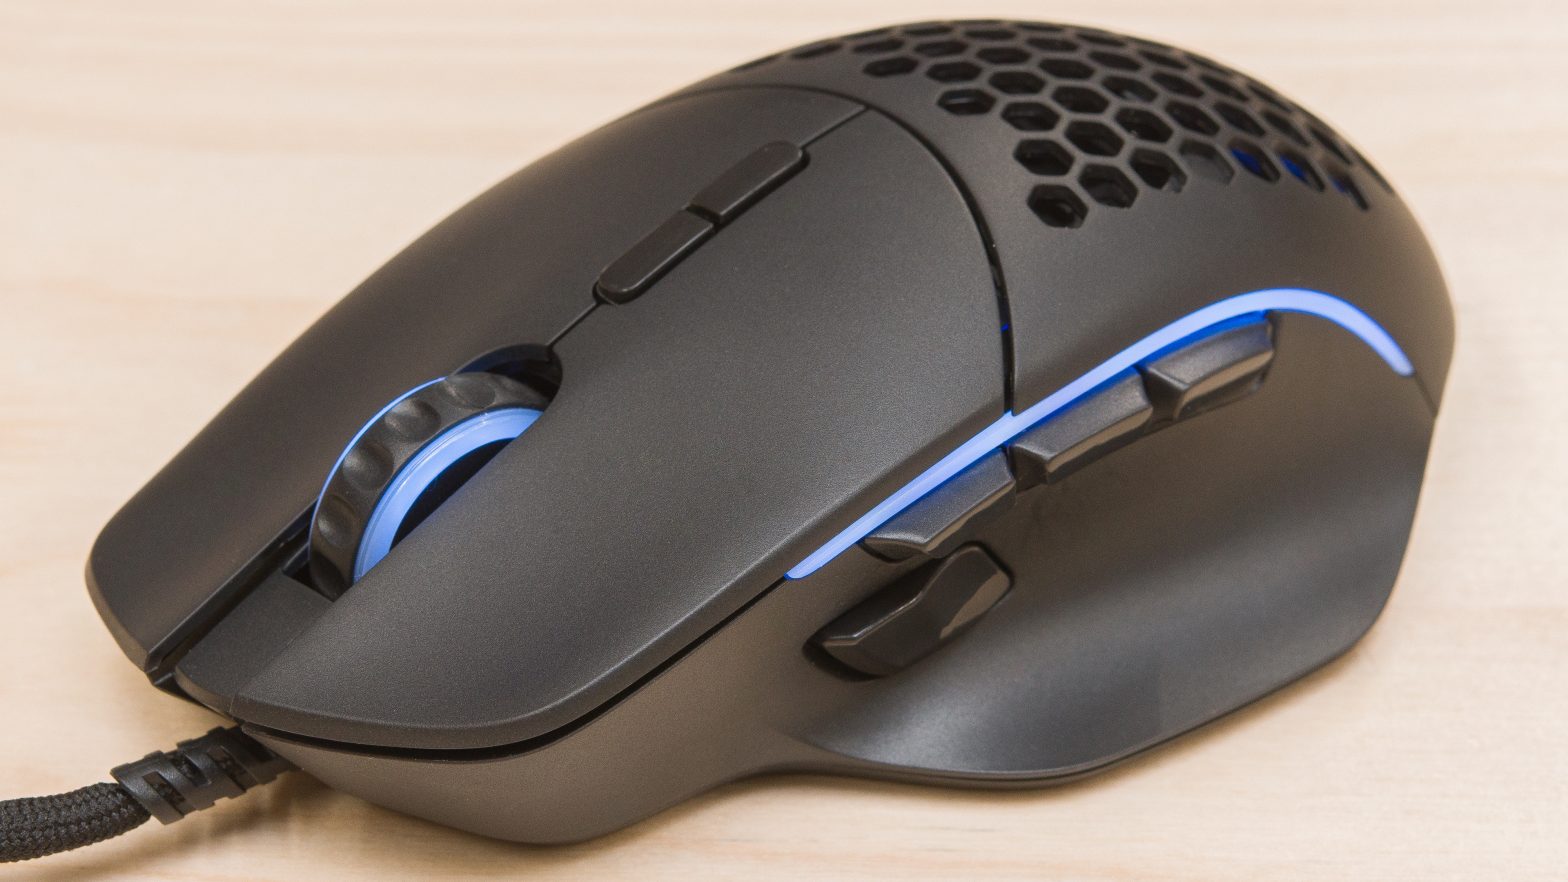 Glorious Model I Gaming Mouse Review